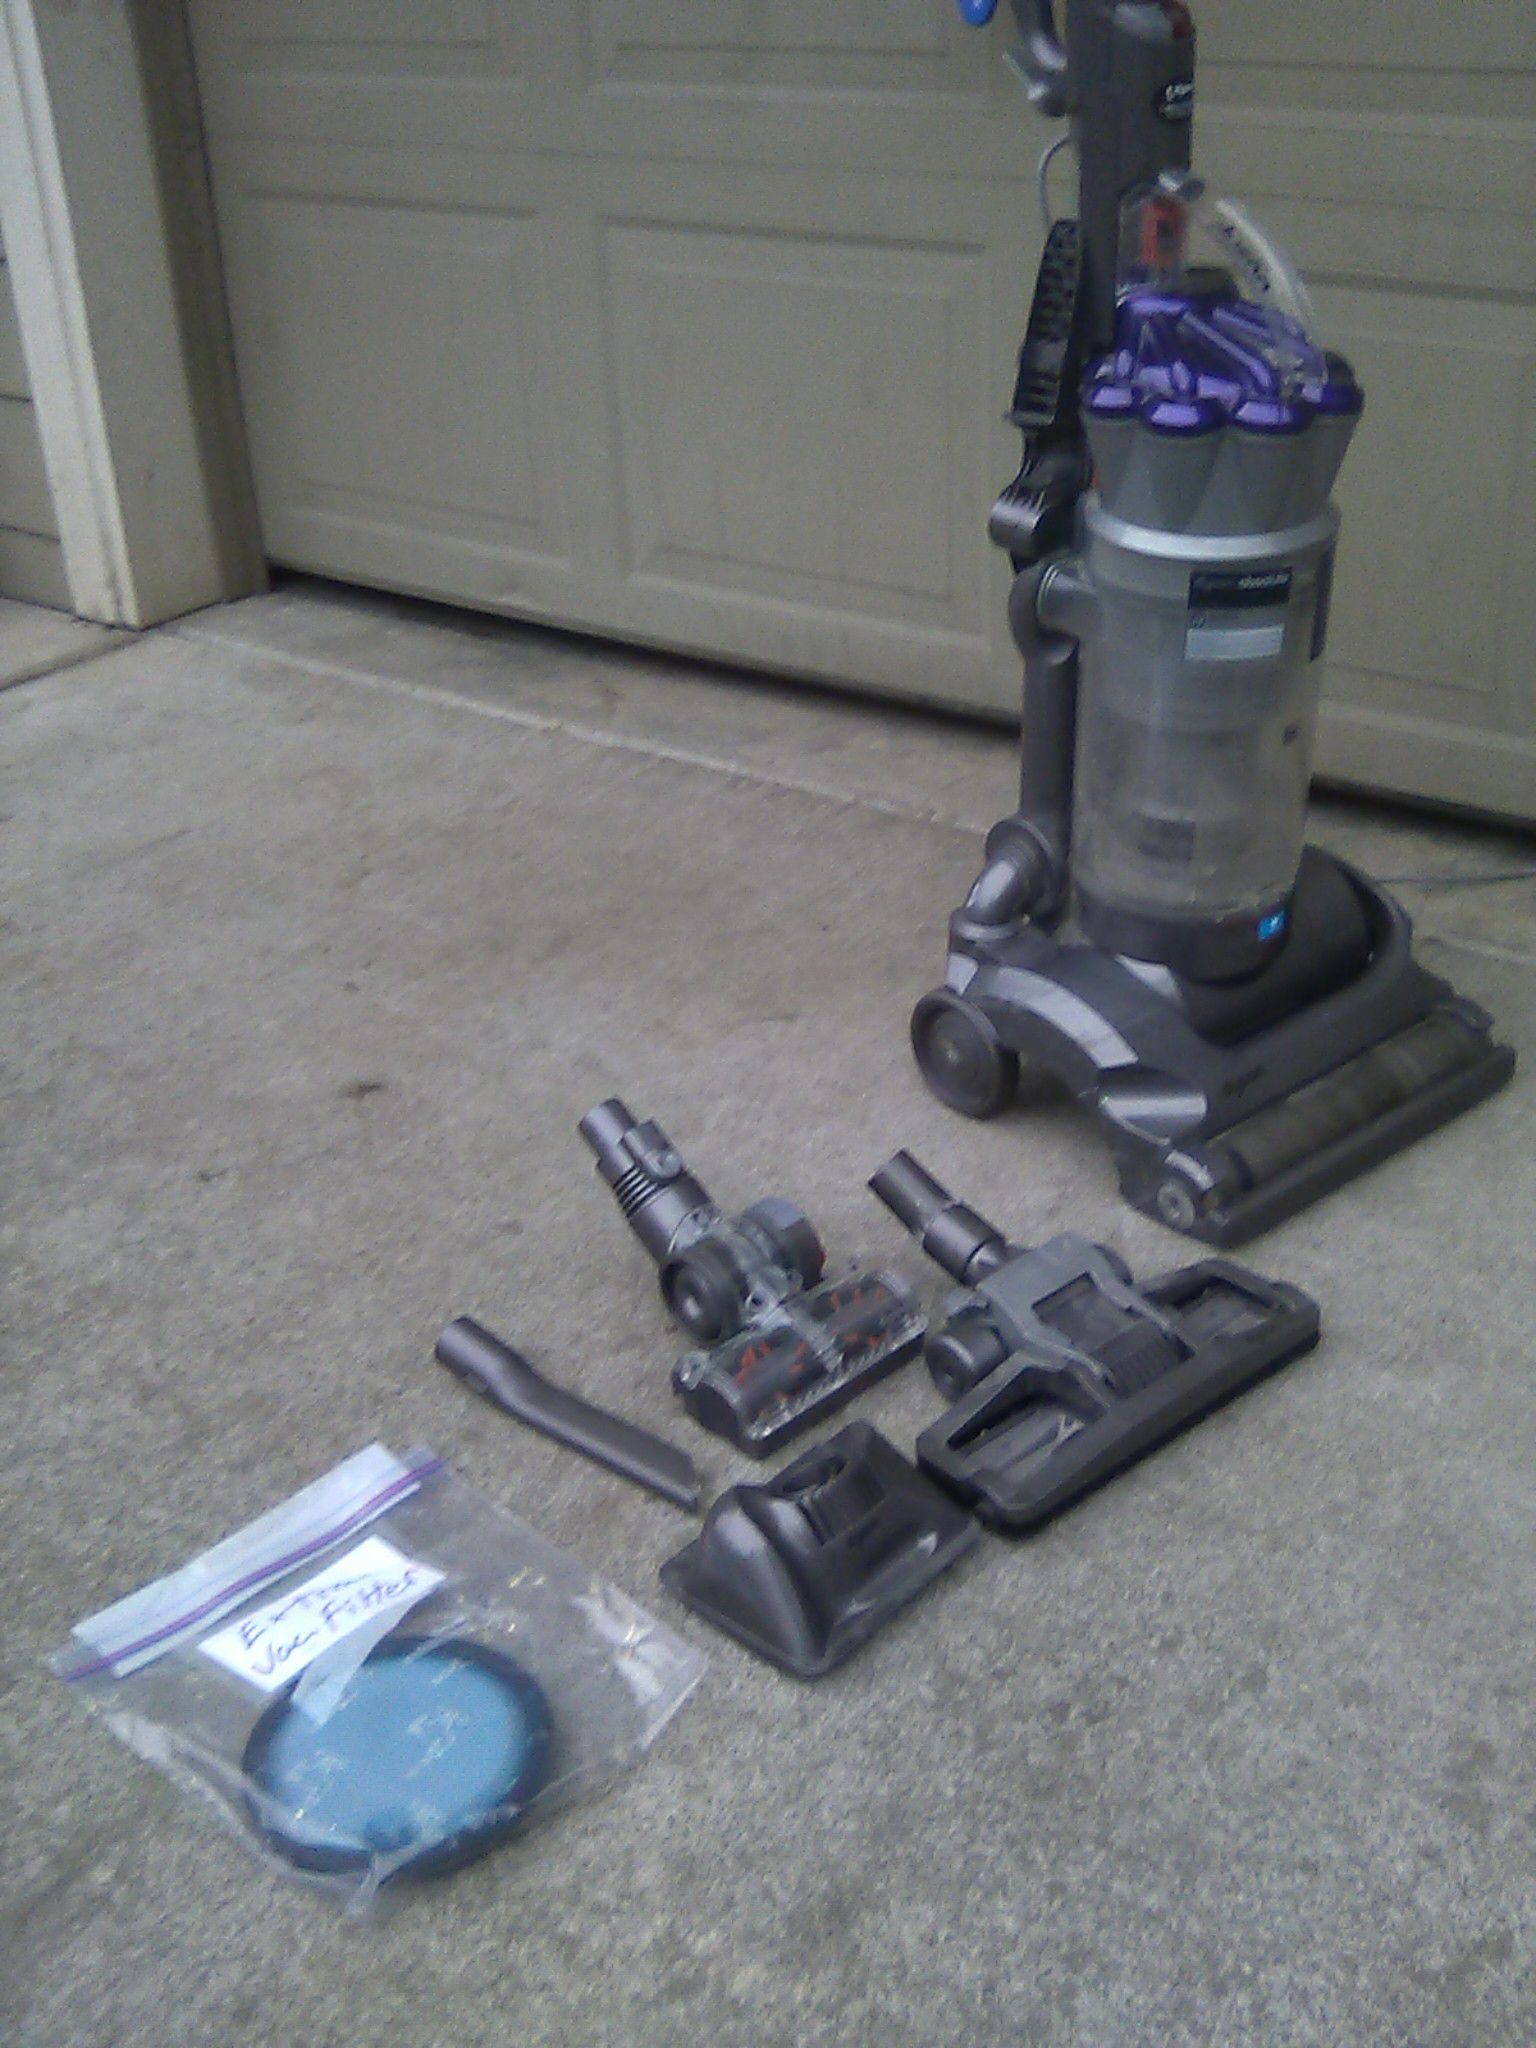 Dyson Absolute DC 17 Animal upright vacuum cleaner